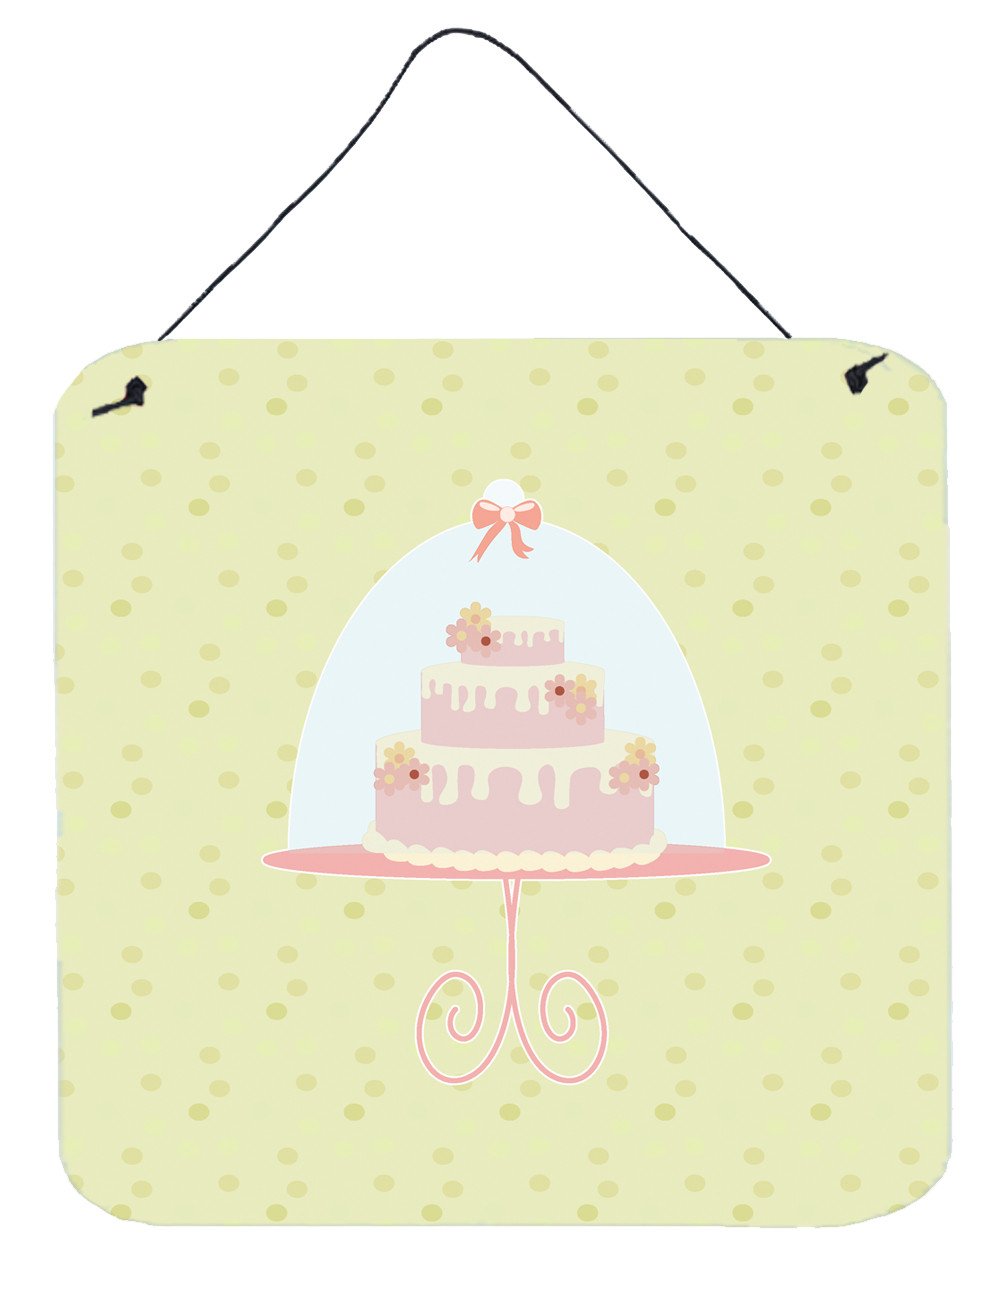 Decorated Cake on Green Wall or Door Hanging Prints BB7306DS66 by Caroline's Treasures